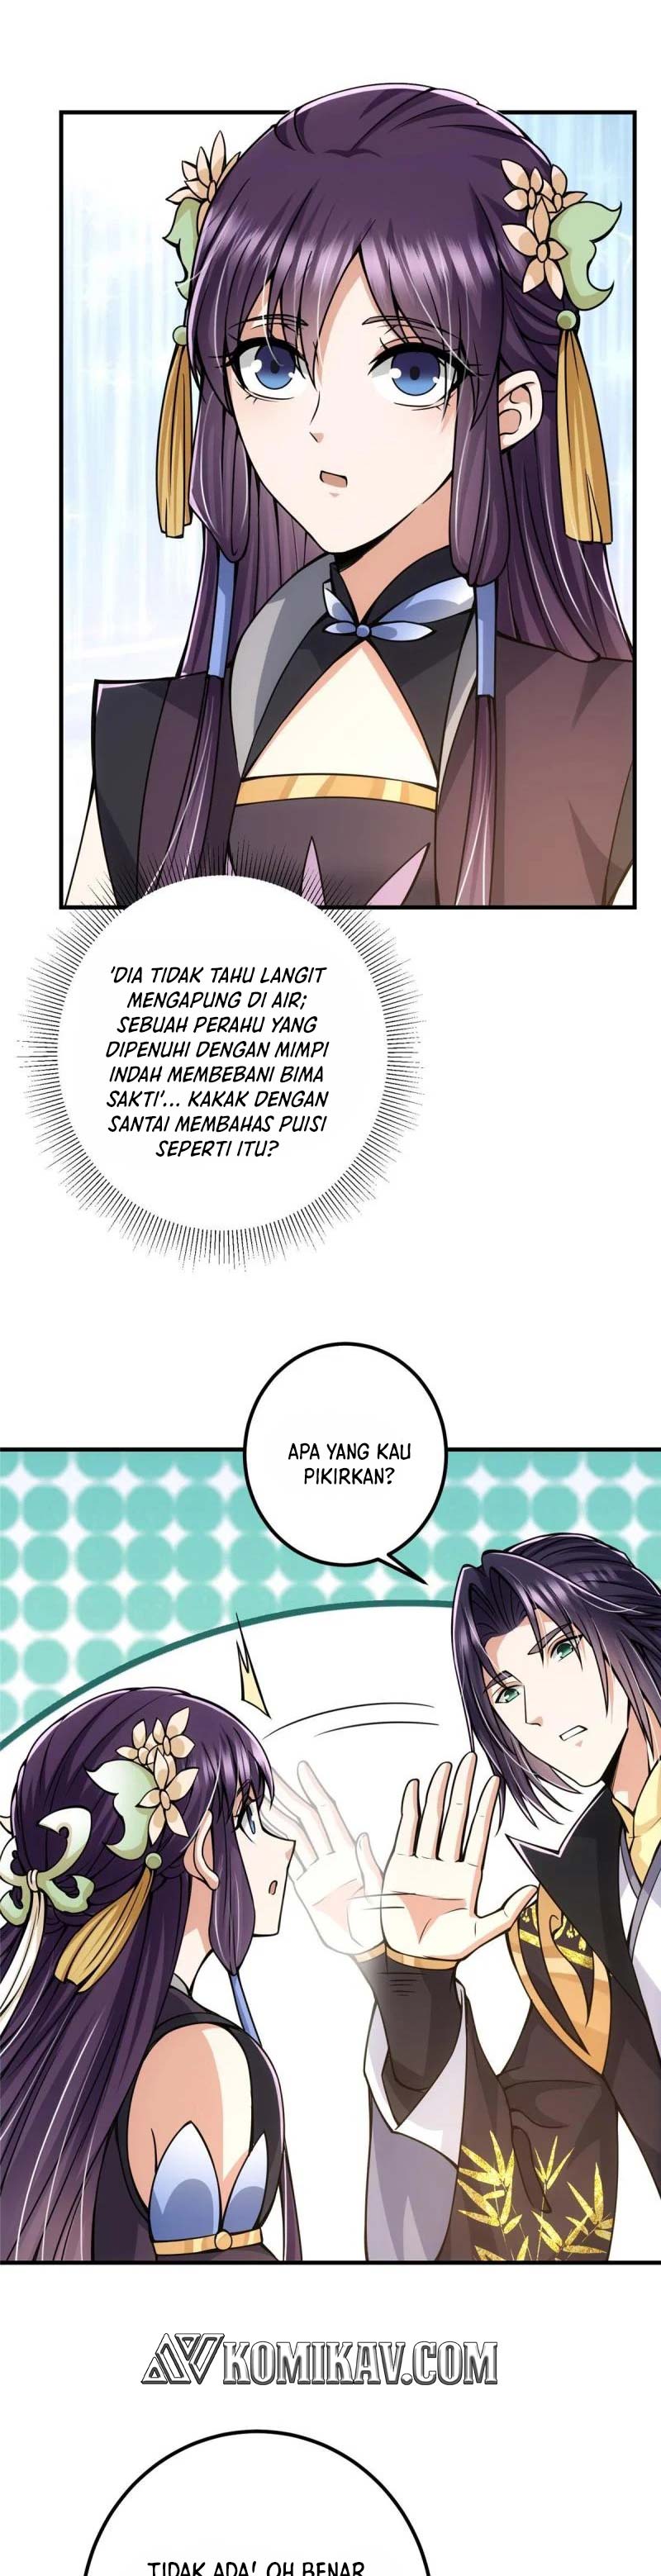 Keep A Low Profile, Sect Leader Chapter 85 Bahasa Indonesia